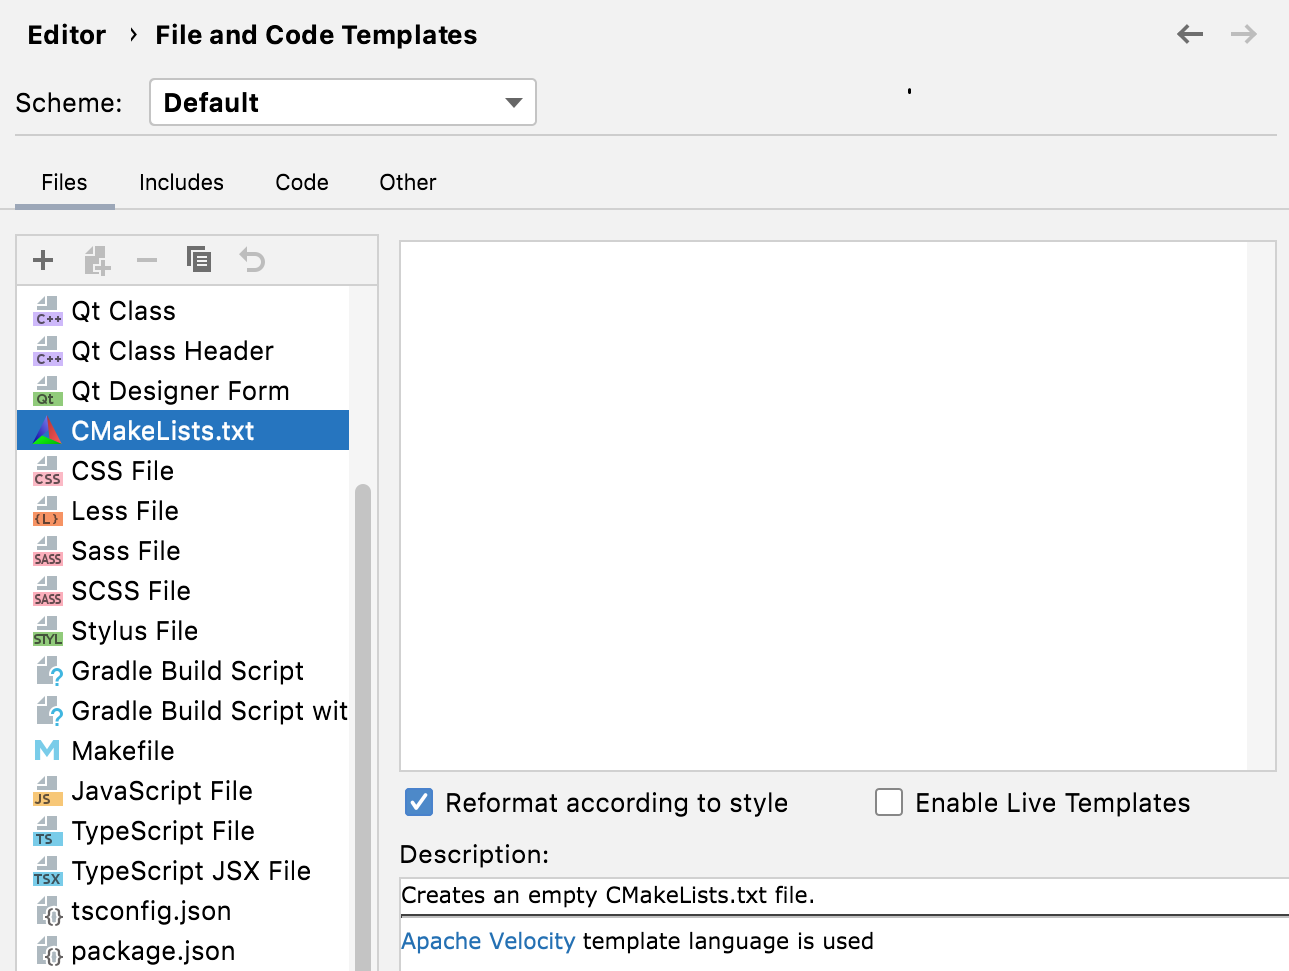 File template for a new CMakeLists.txt file